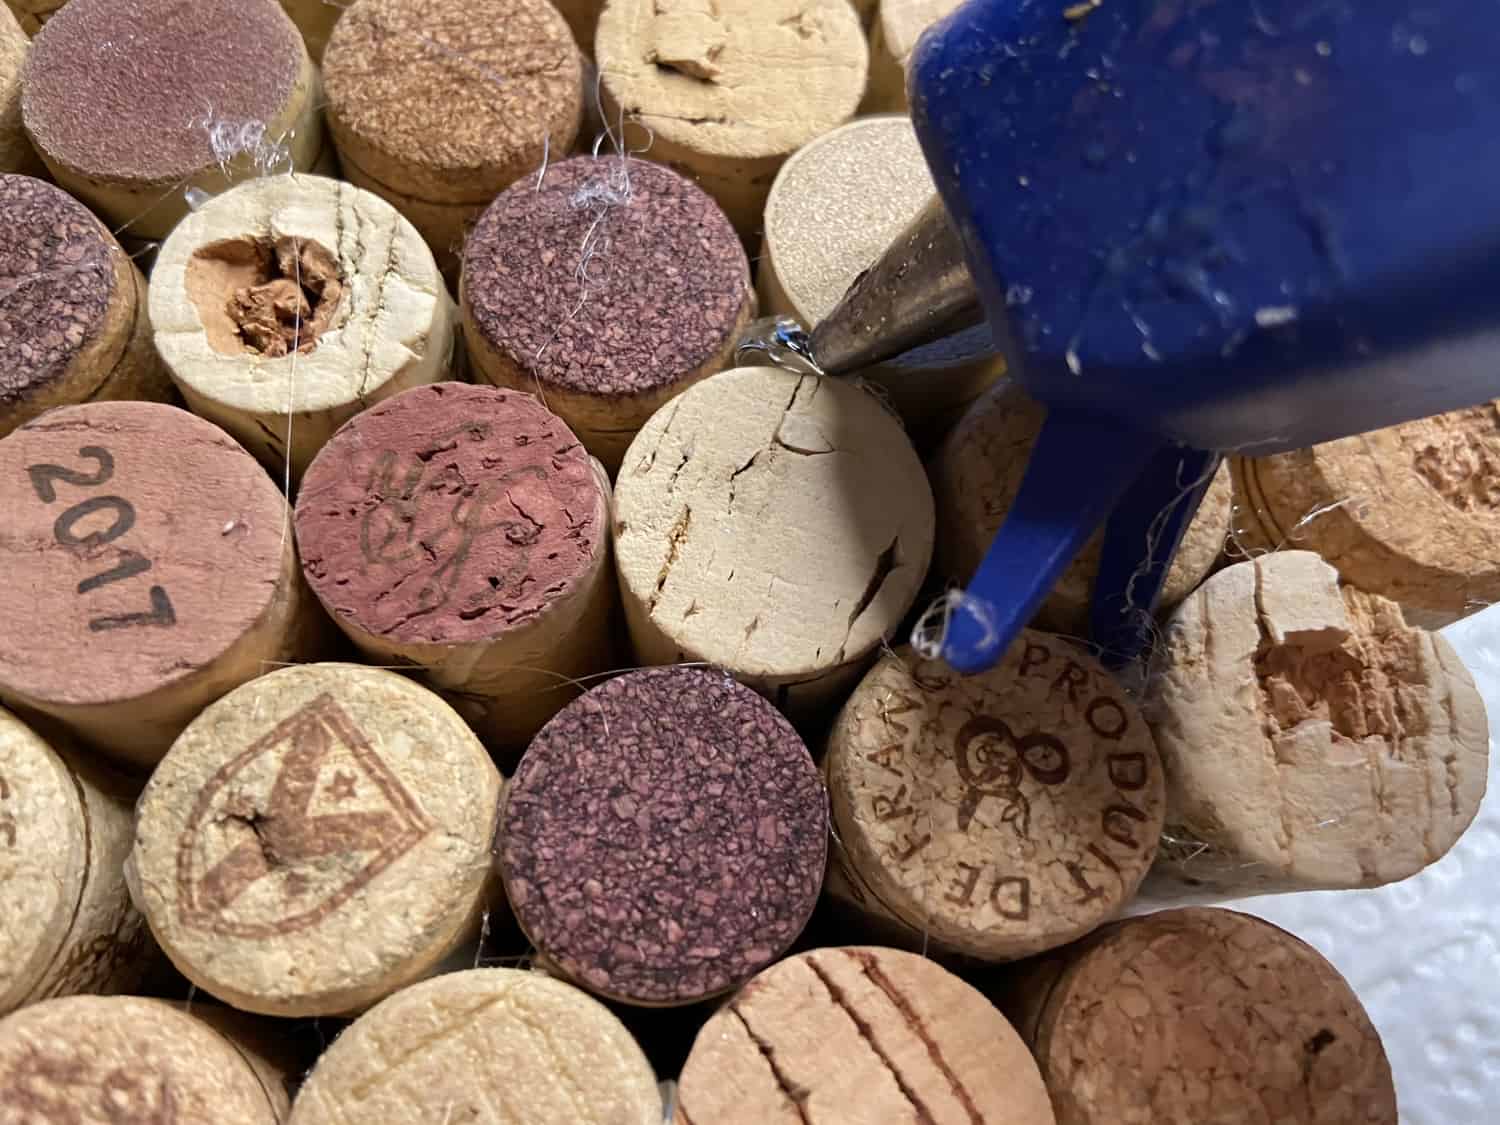 Using hot glue gun to place glue between the corks.